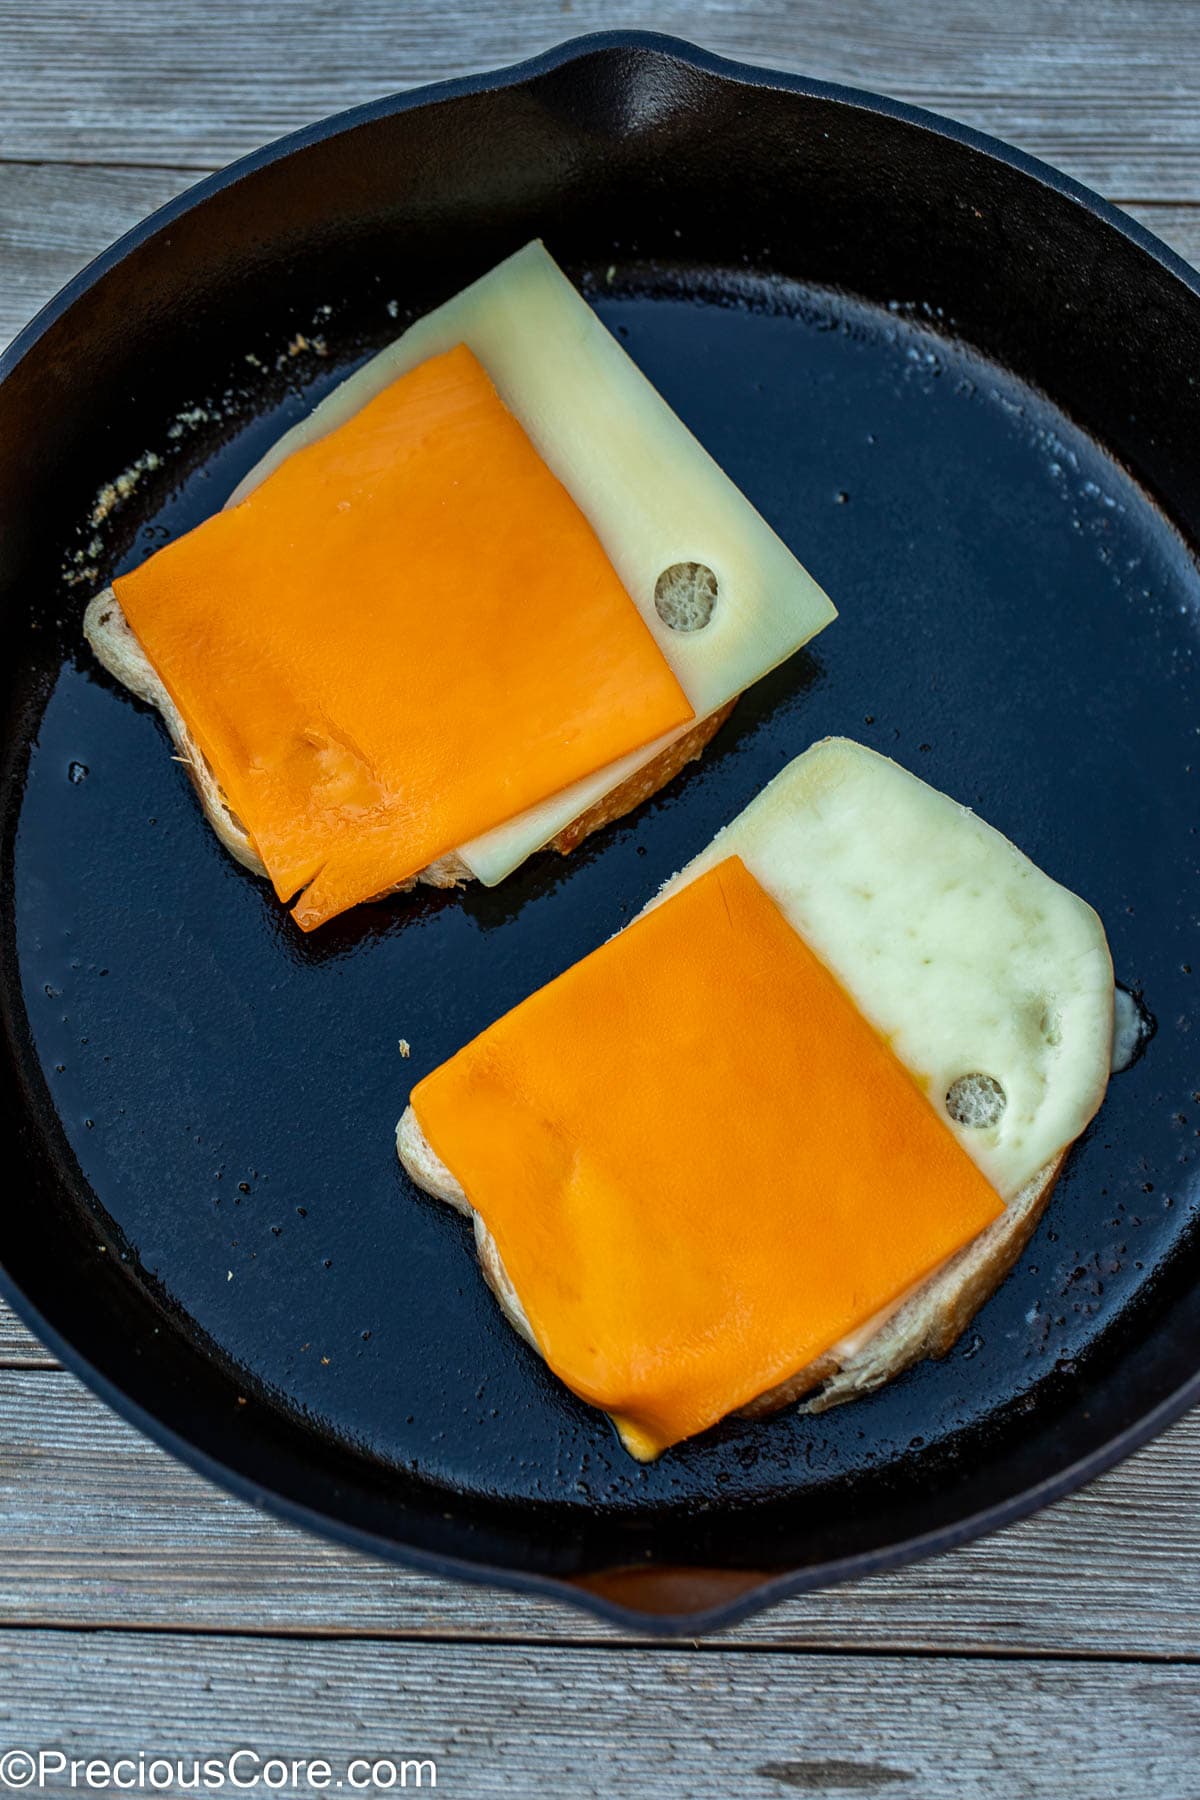 Slices of cheese on bread slices.